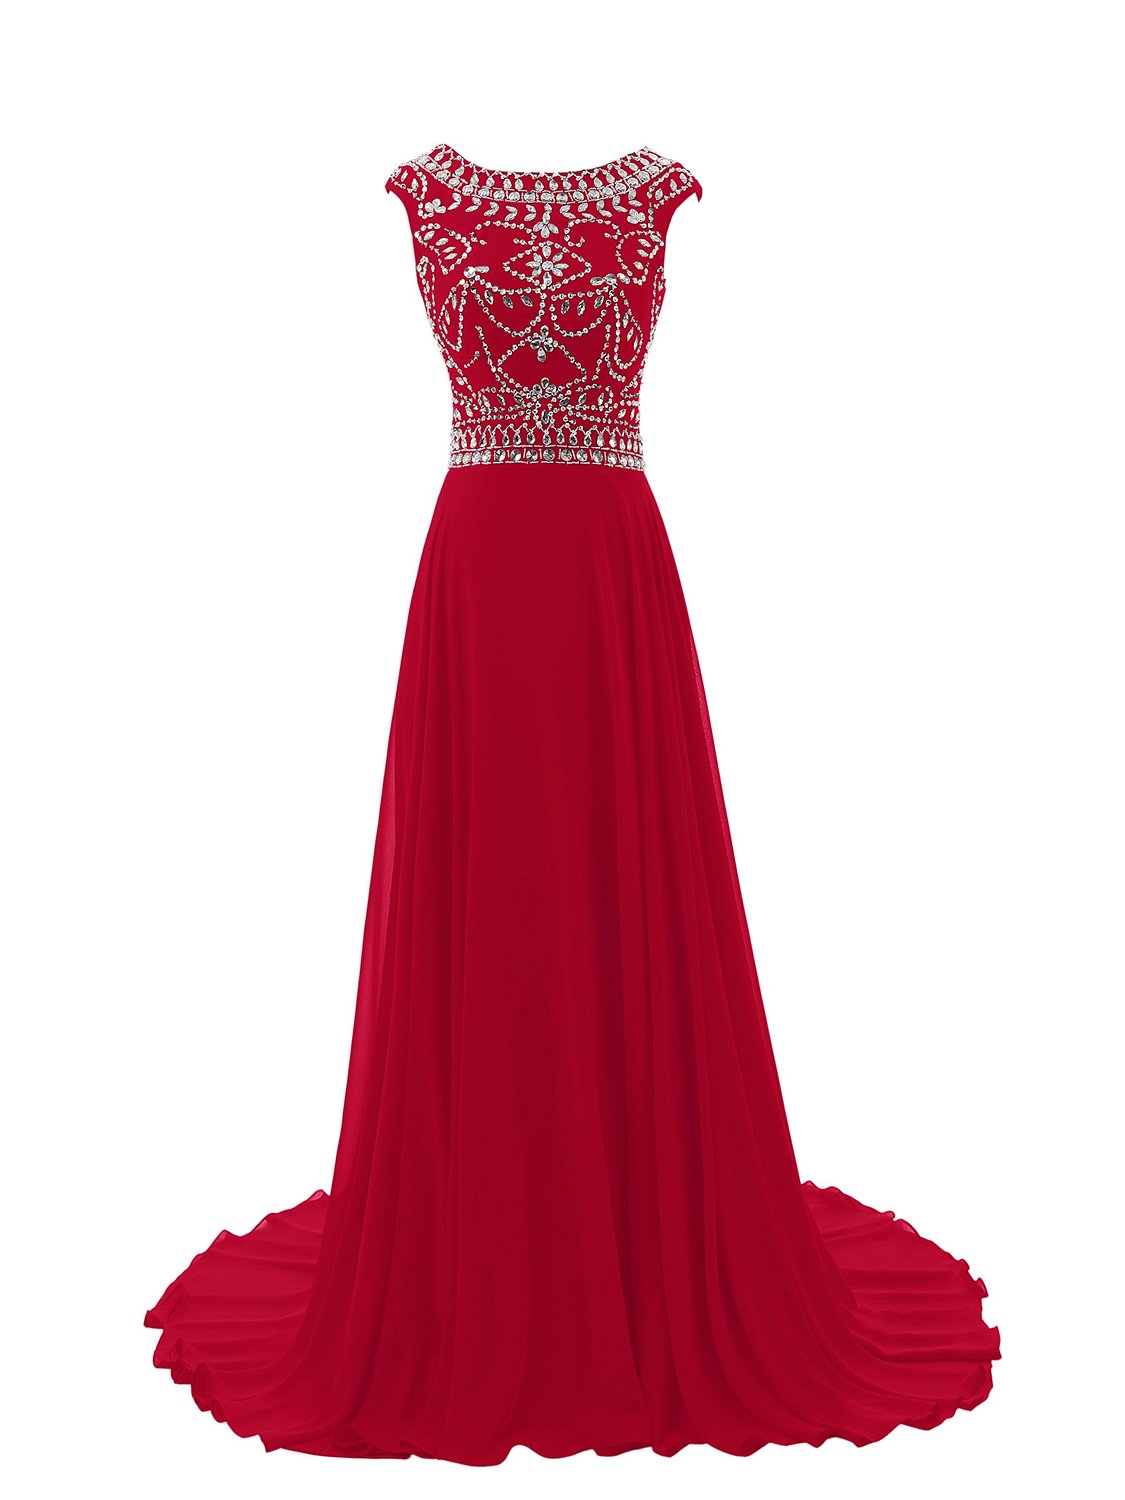 Sparkle Burgundy Beadings Prom Gown 2016 Red Style Prom Dresses 2016 Evening Dresses